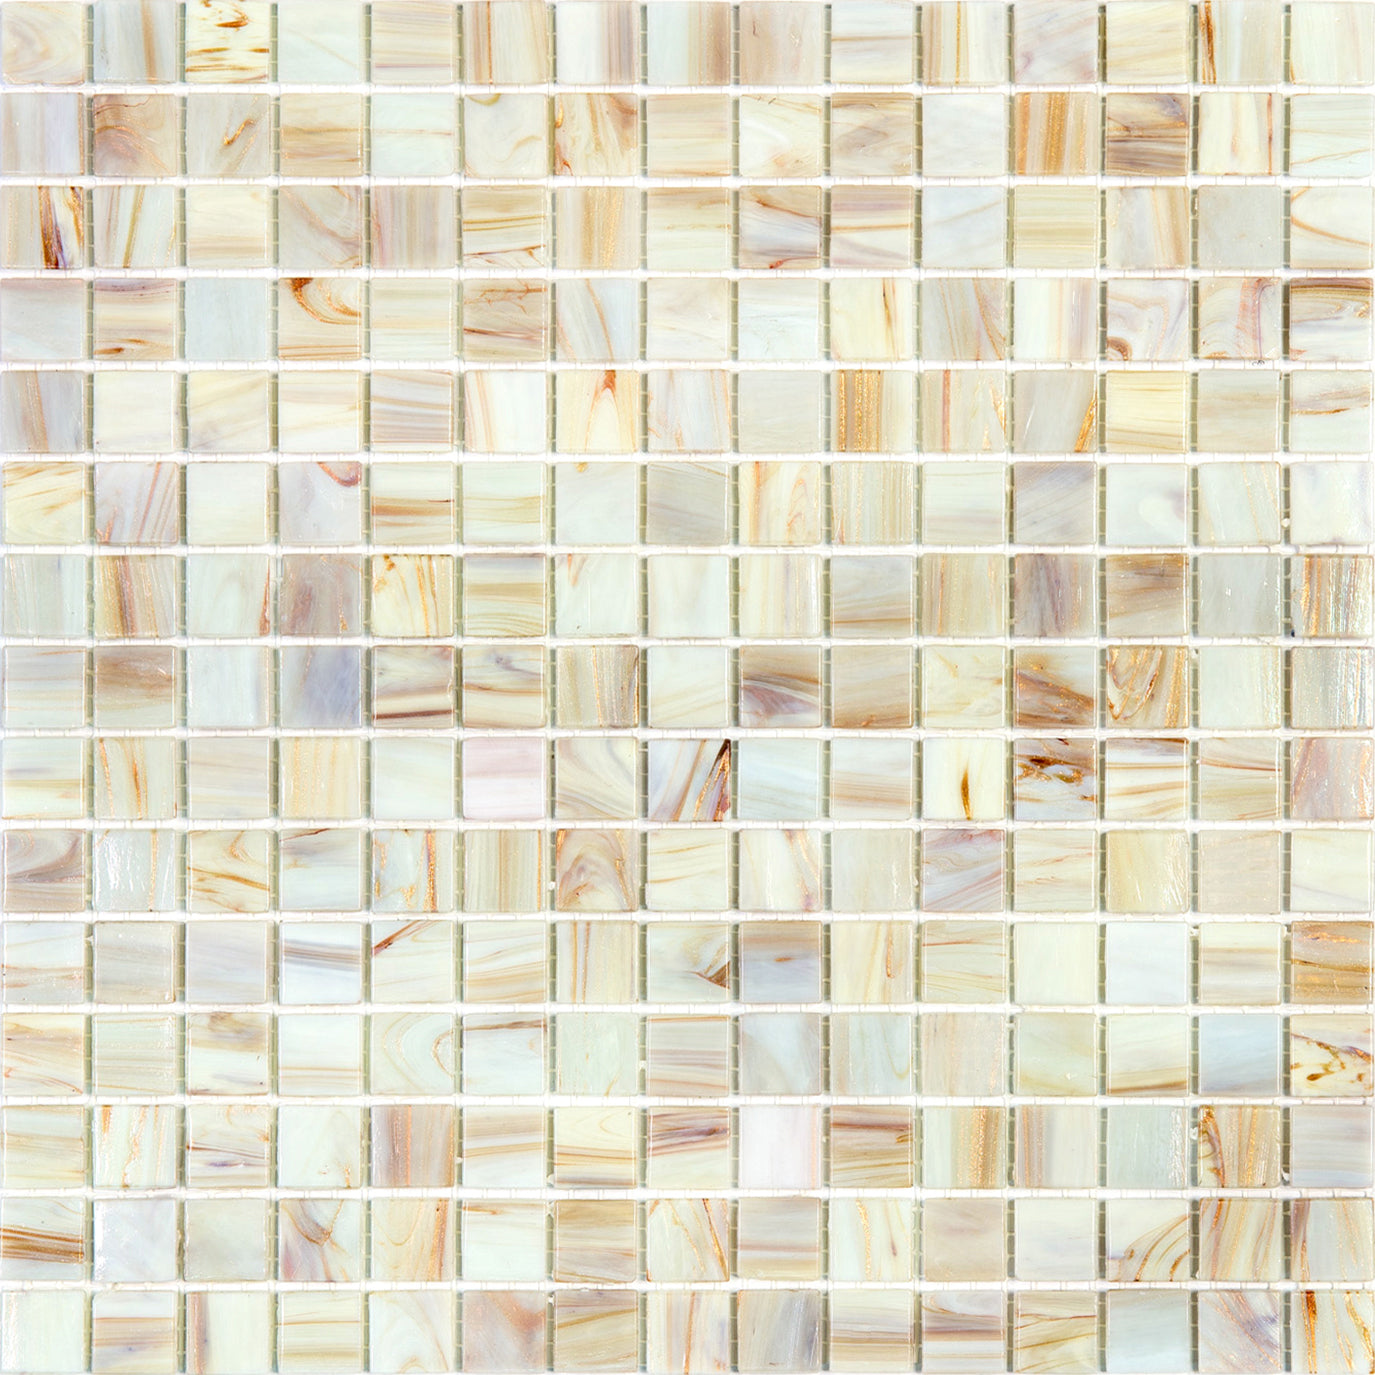 mir alma solid colors 0_8 inch stella stn388 wall and floor mosaic distributed by surface group natural materials